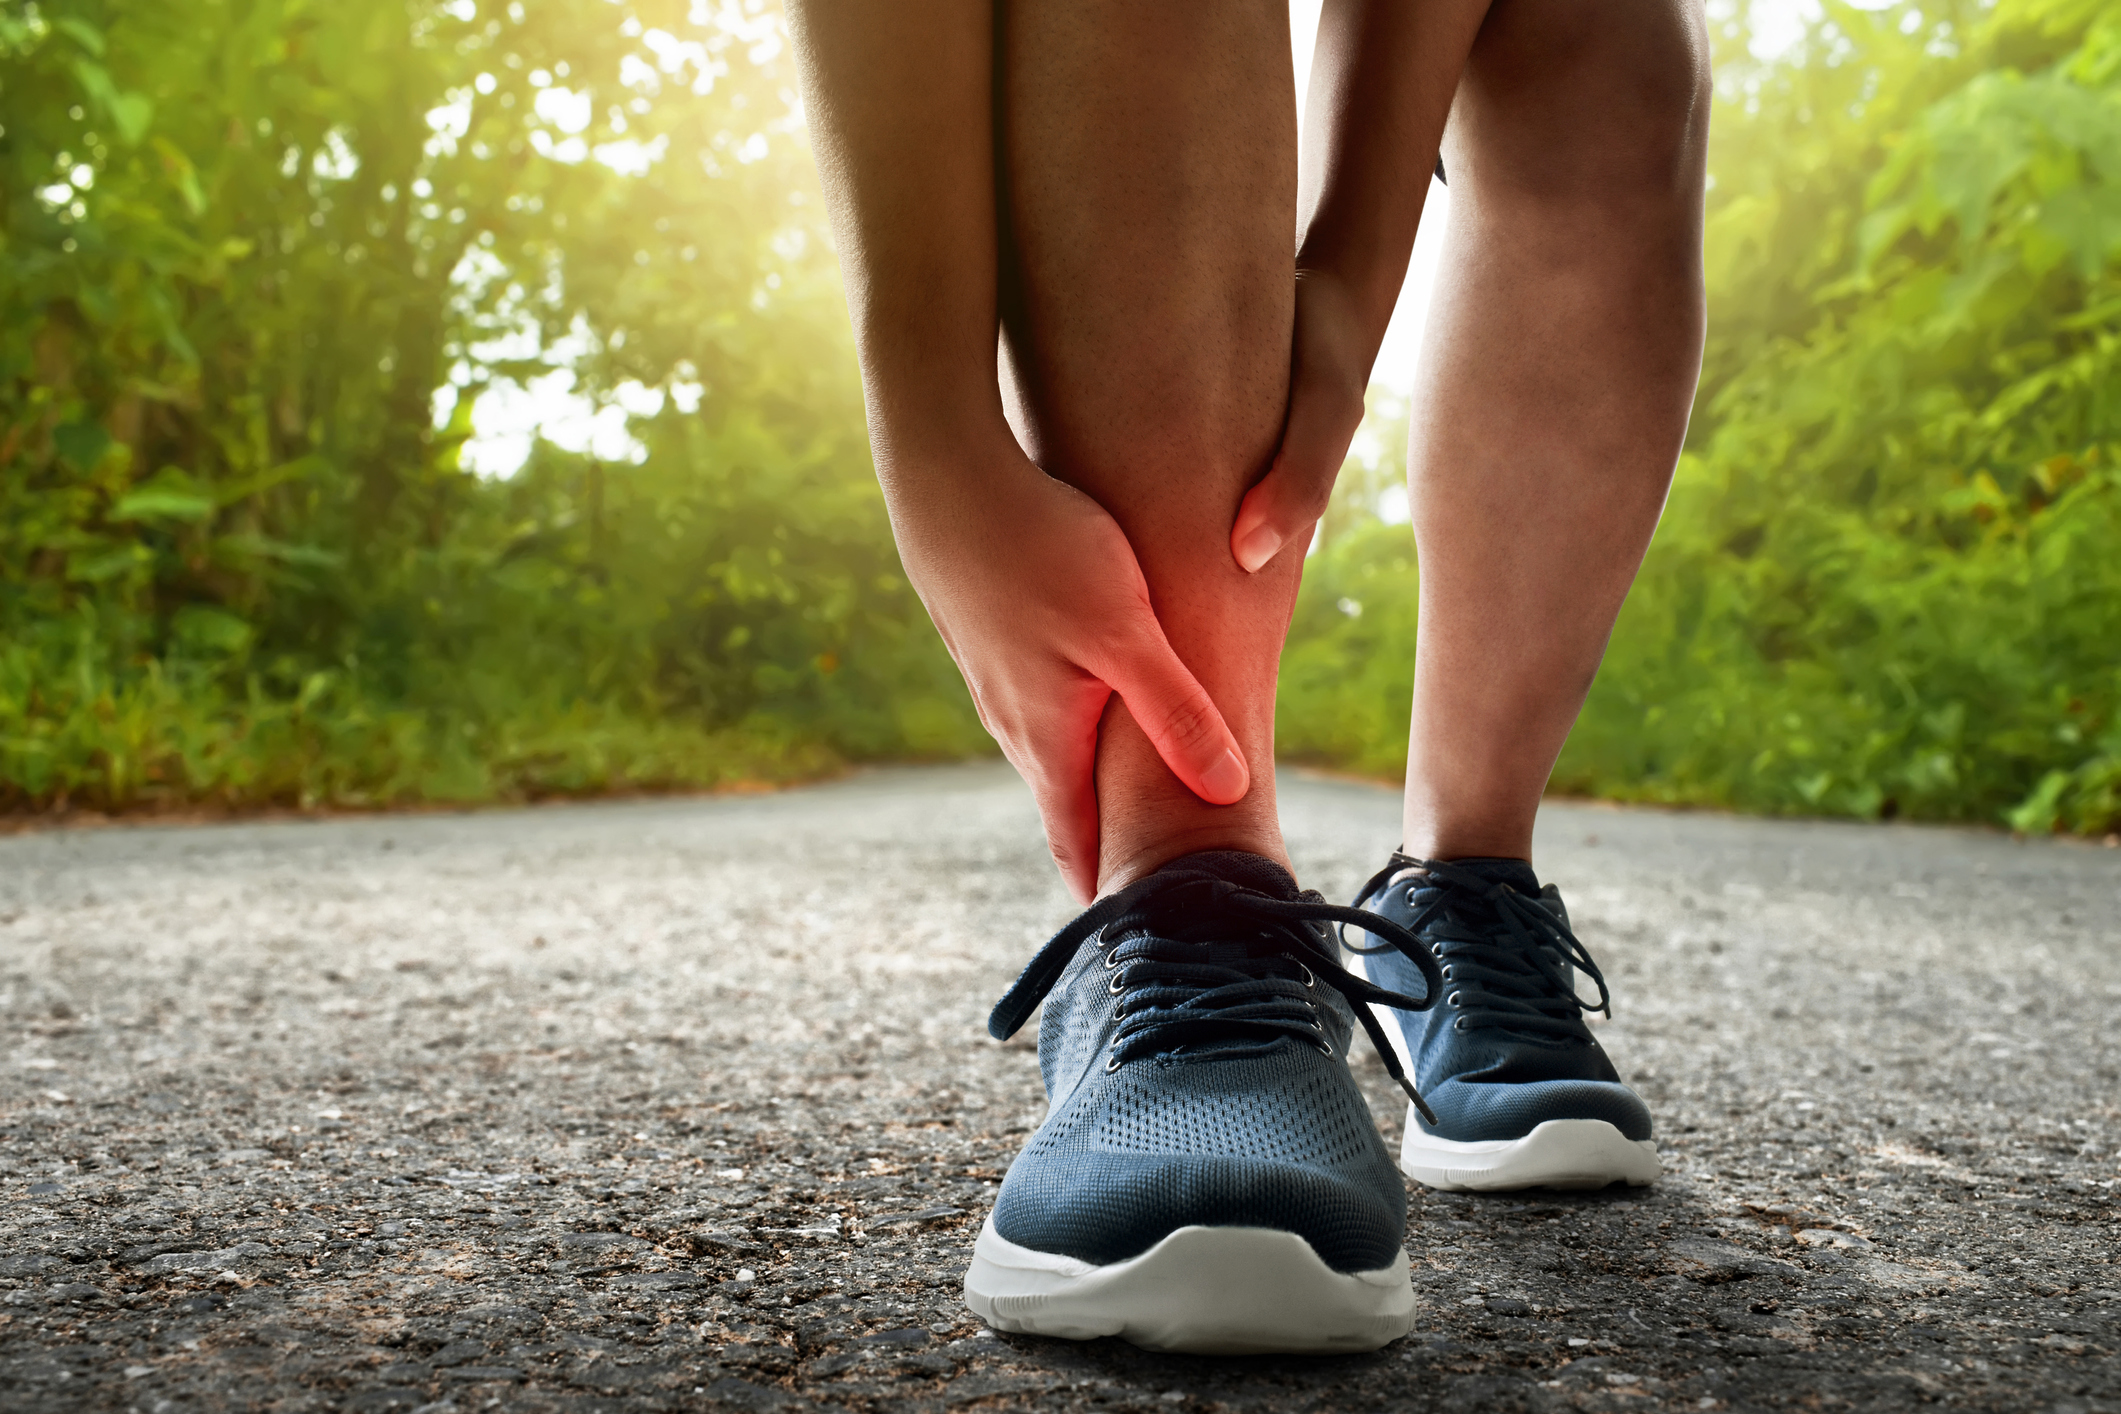 Runner stopped to hold red ankle in pain